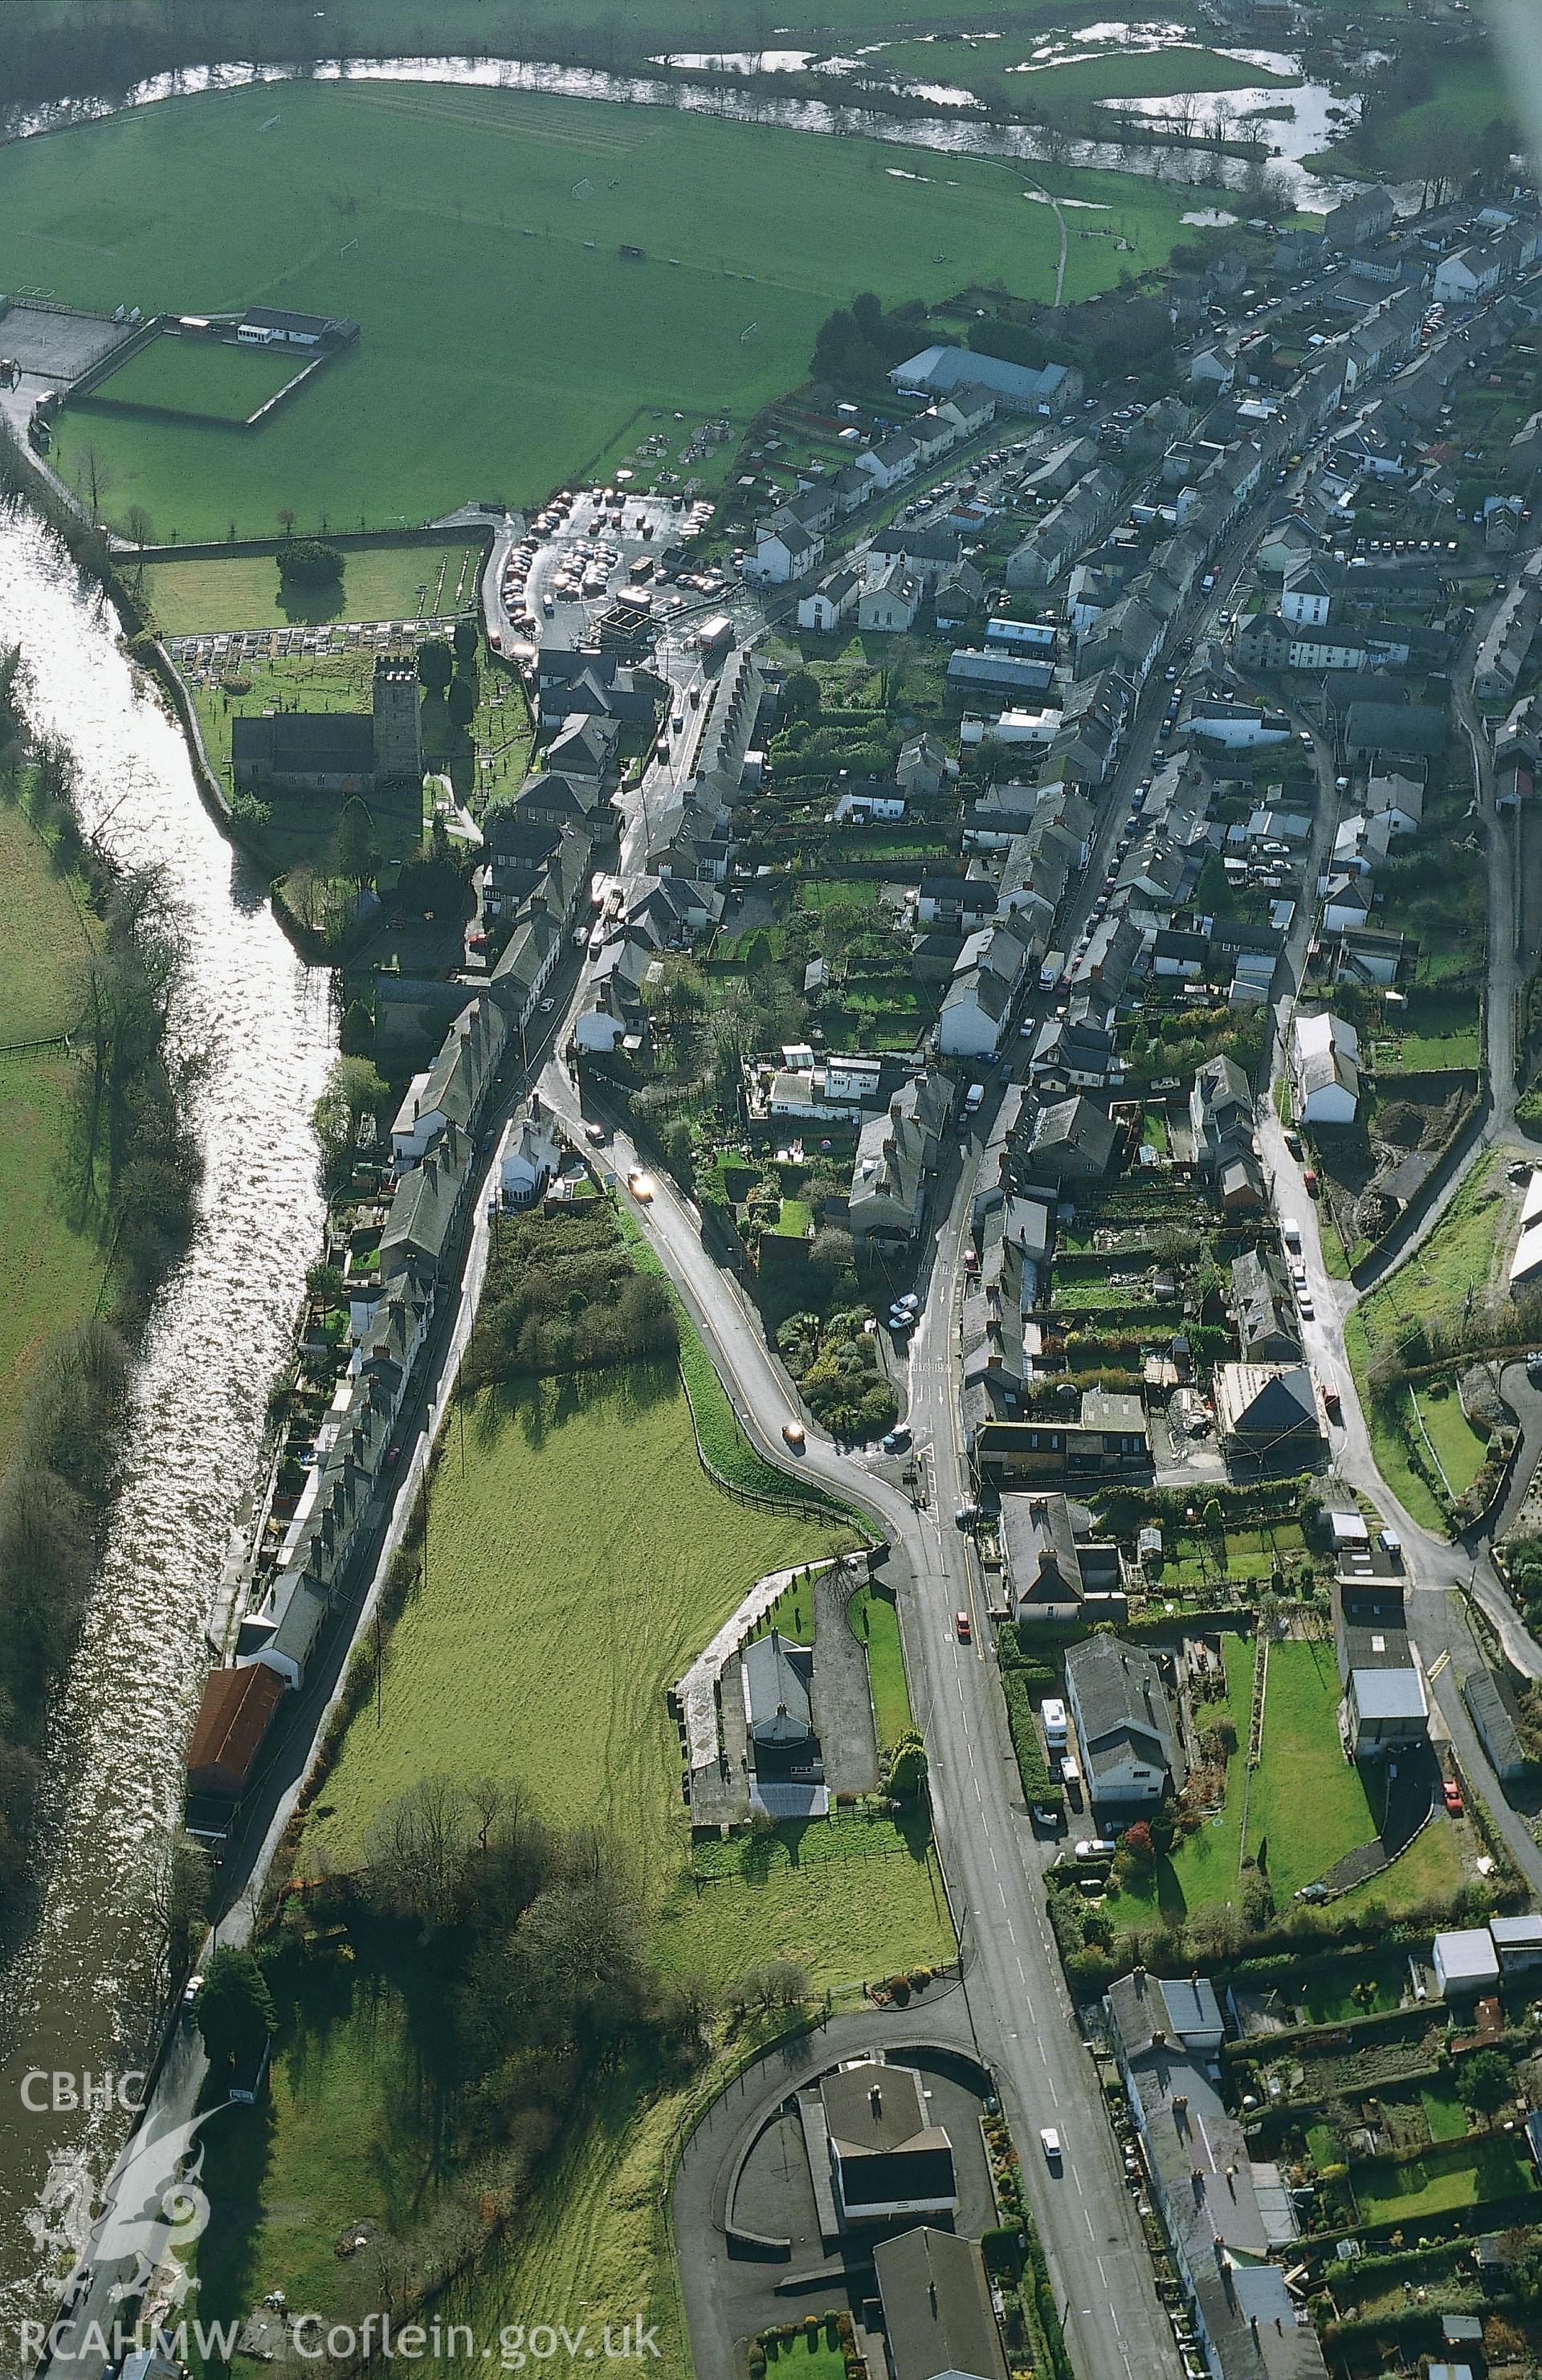 Slide of RCAHMW colour oblique aerial photograph of aerial view of Llandysul, taken by Toby Driver, 2002.